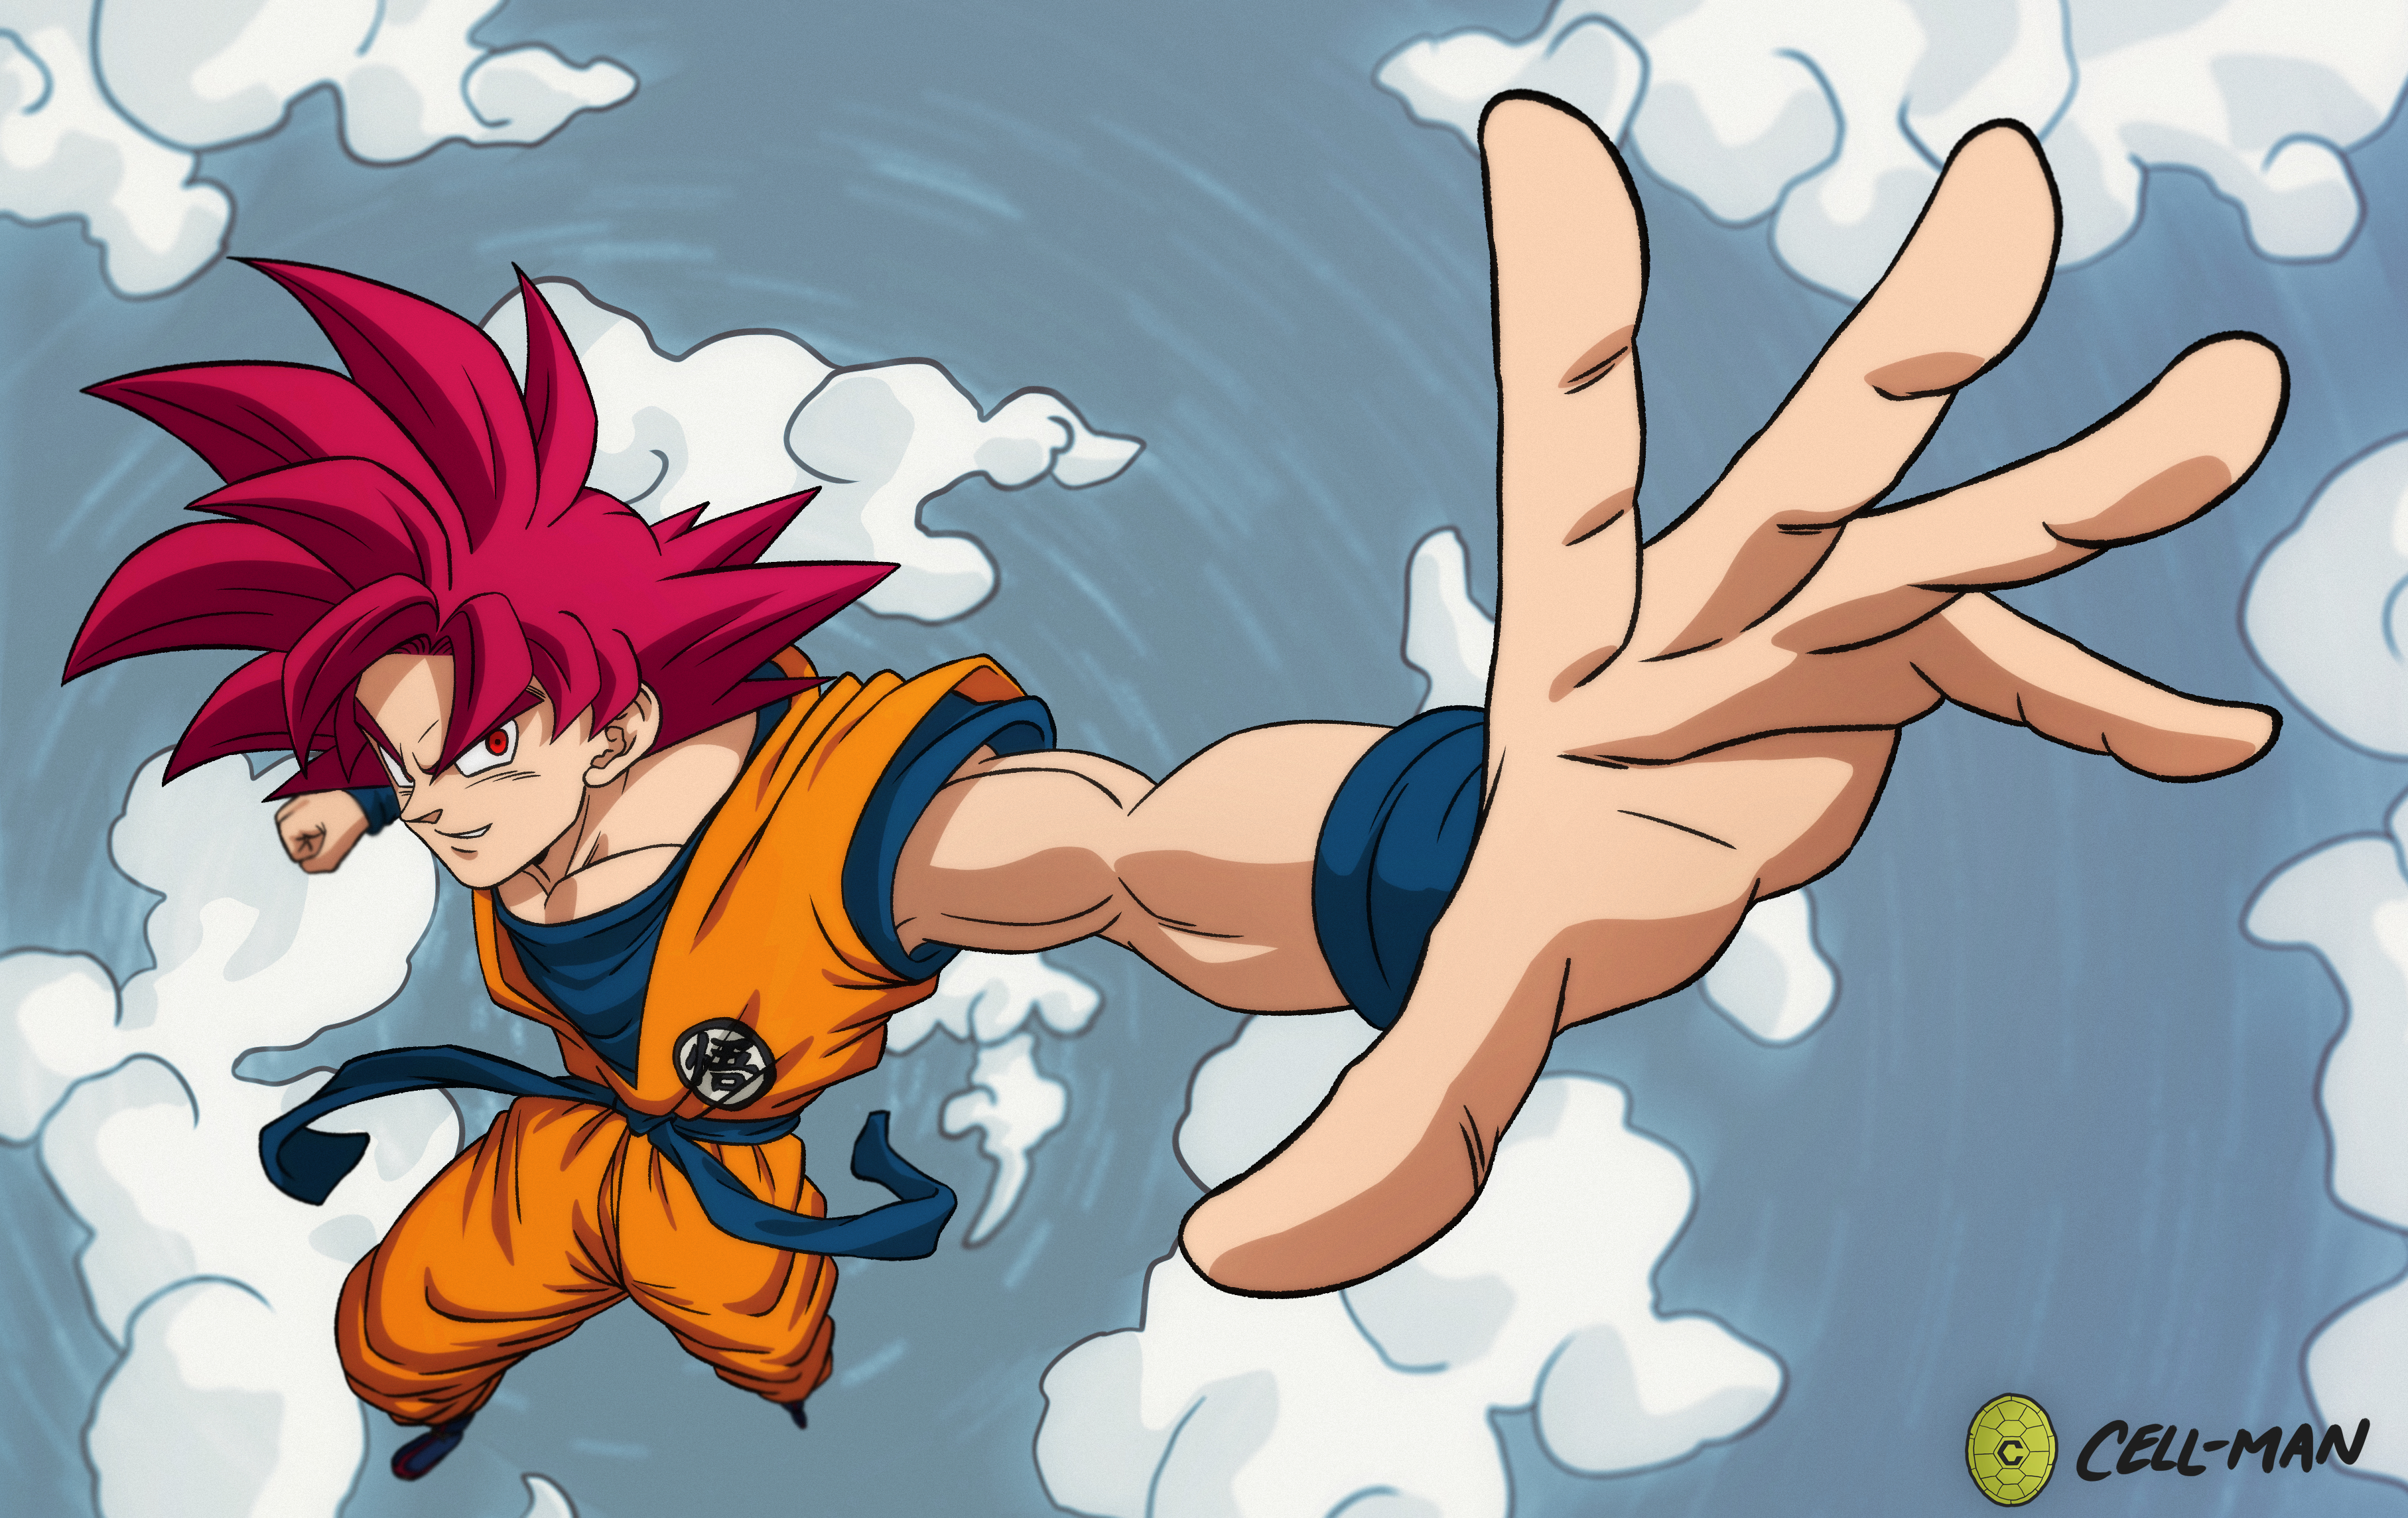 Goku From Dragon Ball Super Wallpaper, HD Anime 4K Wallpapers, Images,  Photos and Background - Wallpapers Den